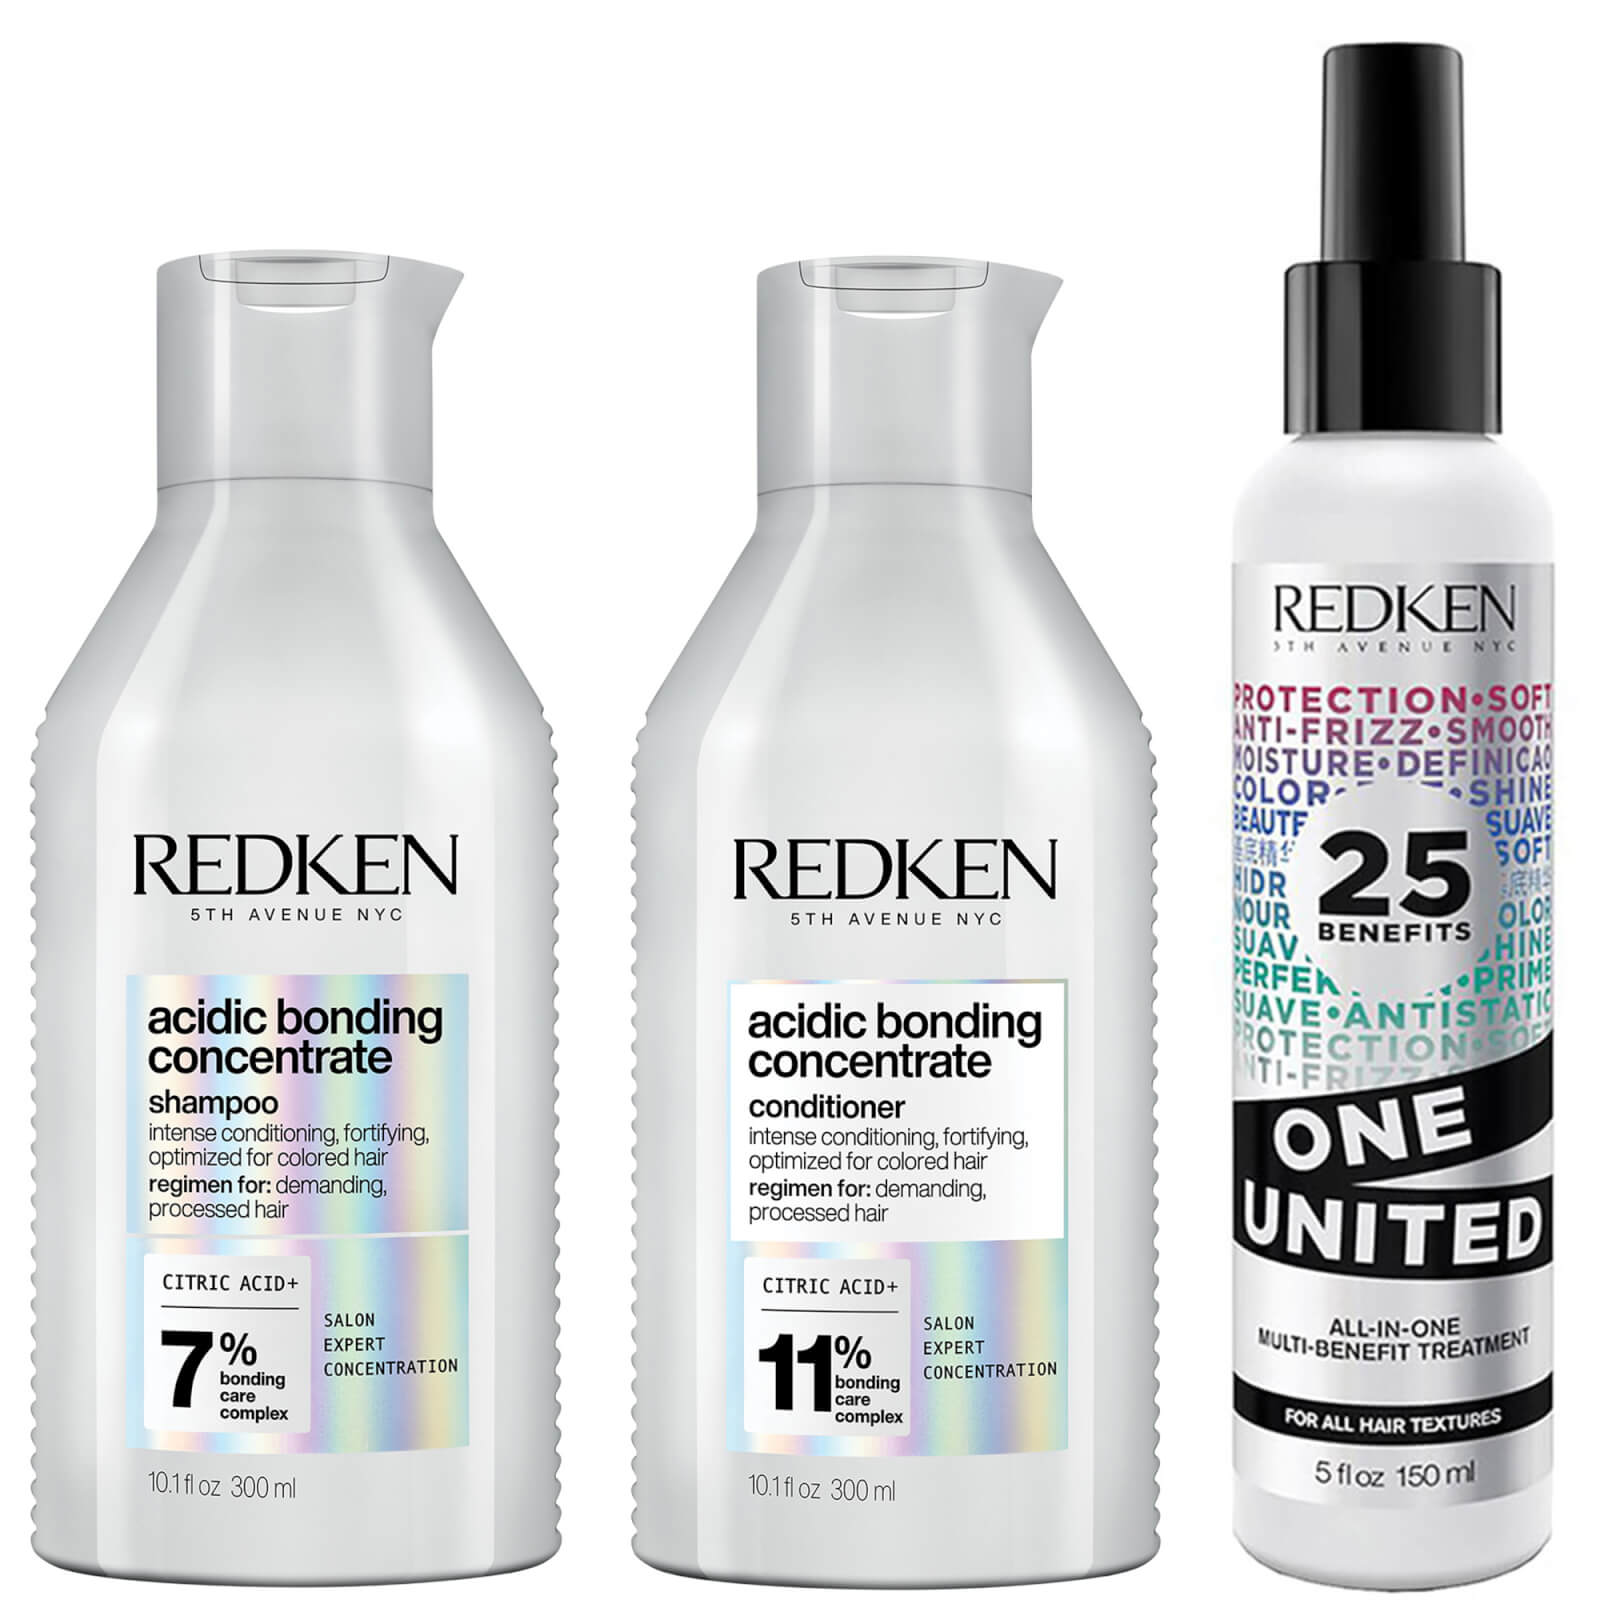 Redken Acidic Bonding Concentrate Shampoo, Conditioner and One United Multi-Benefit Leave-in Treatme